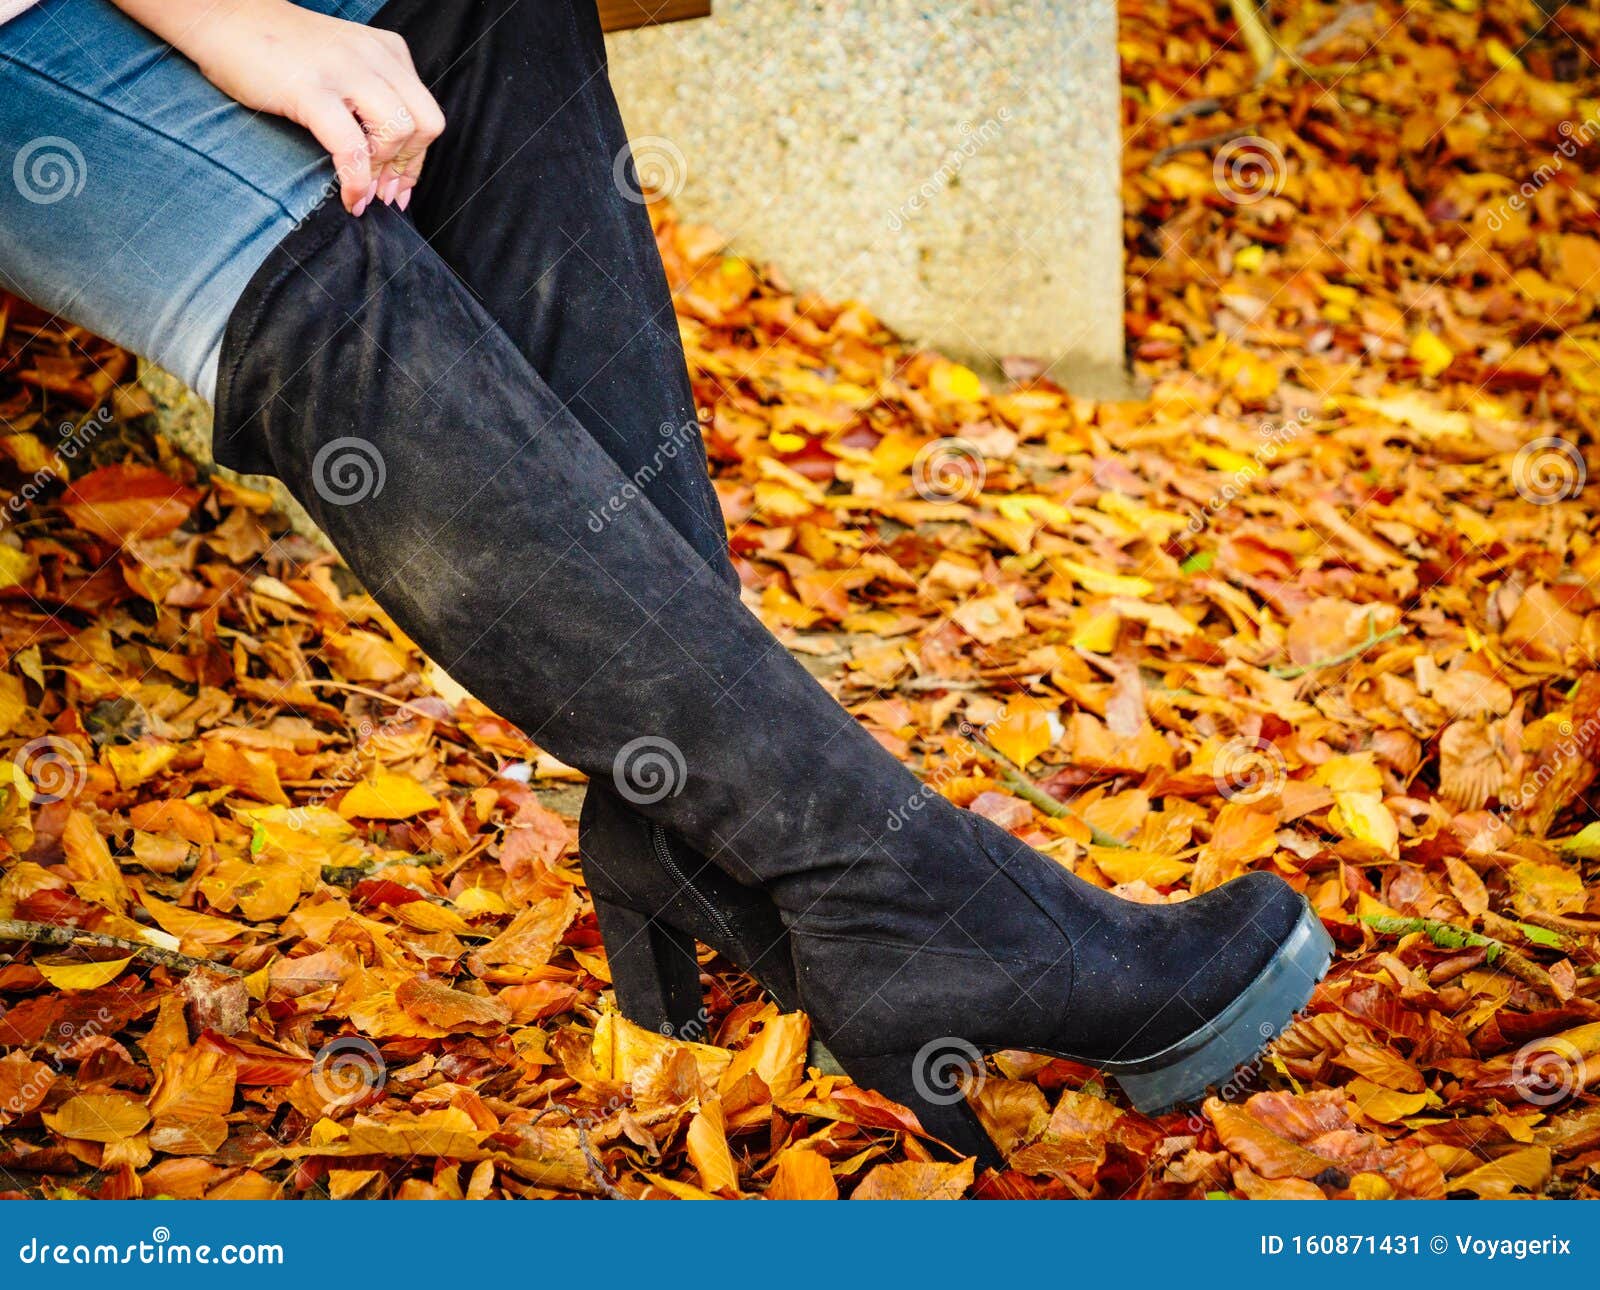 Woman Wearing Black Knee High Boots Stock Image - Image of long, boots ...